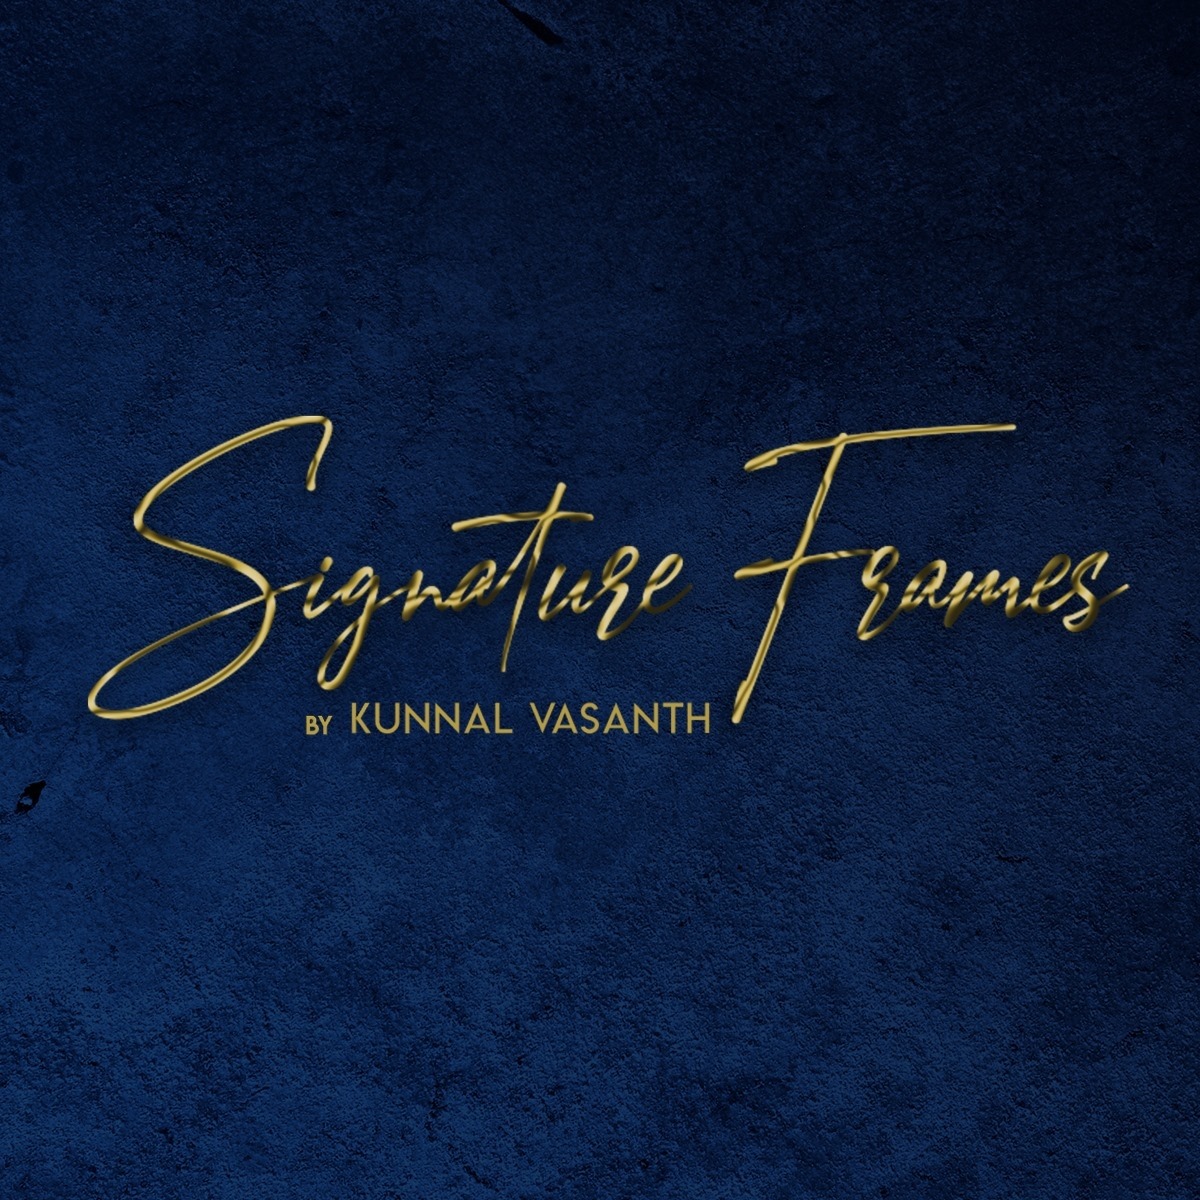 Signature frames studios|Catering Services|Event Services